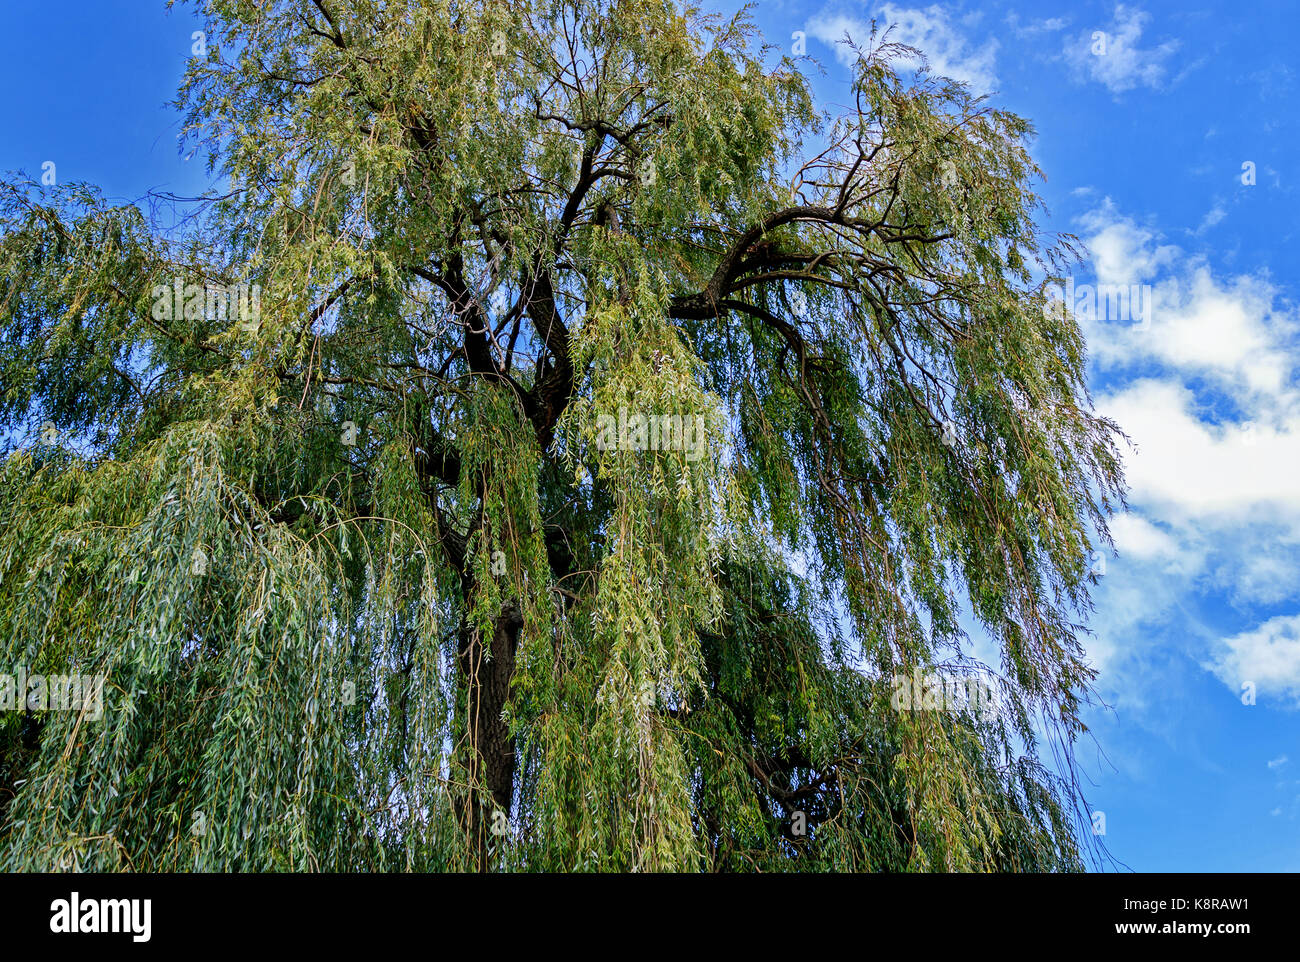 Large Salix babylonica (Babylon willow or weeping willow) Stock Photo